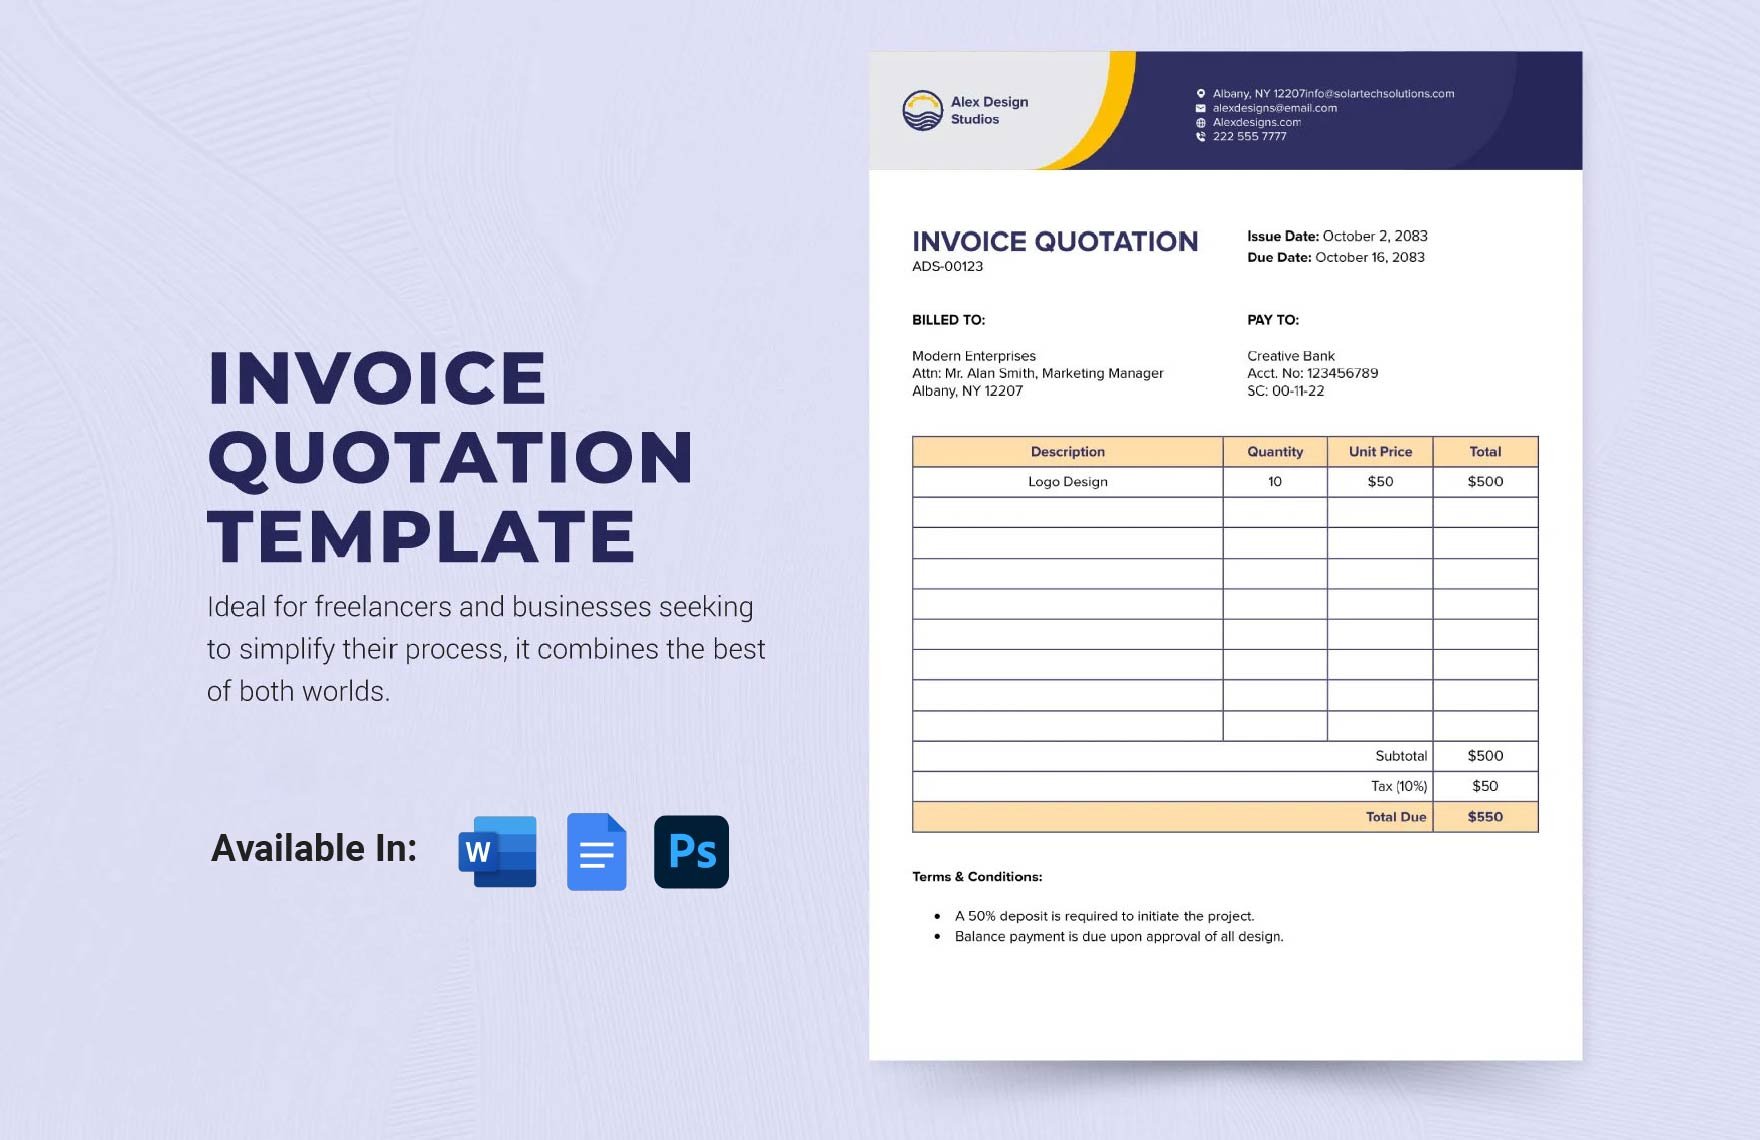 Invoice Quotation Template